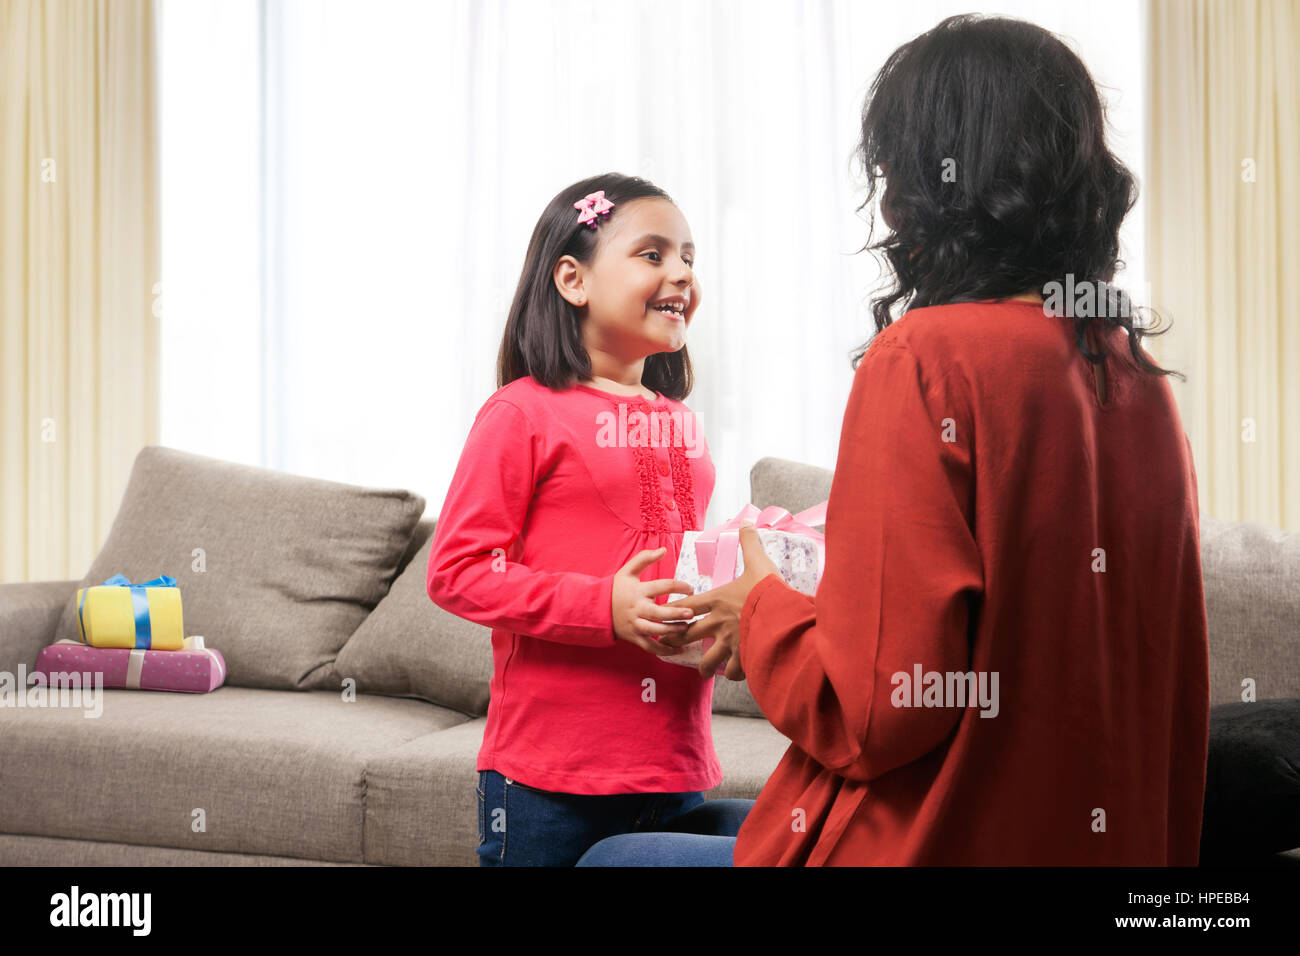 Rear view of mother presenting gift to daughter Stock Photo